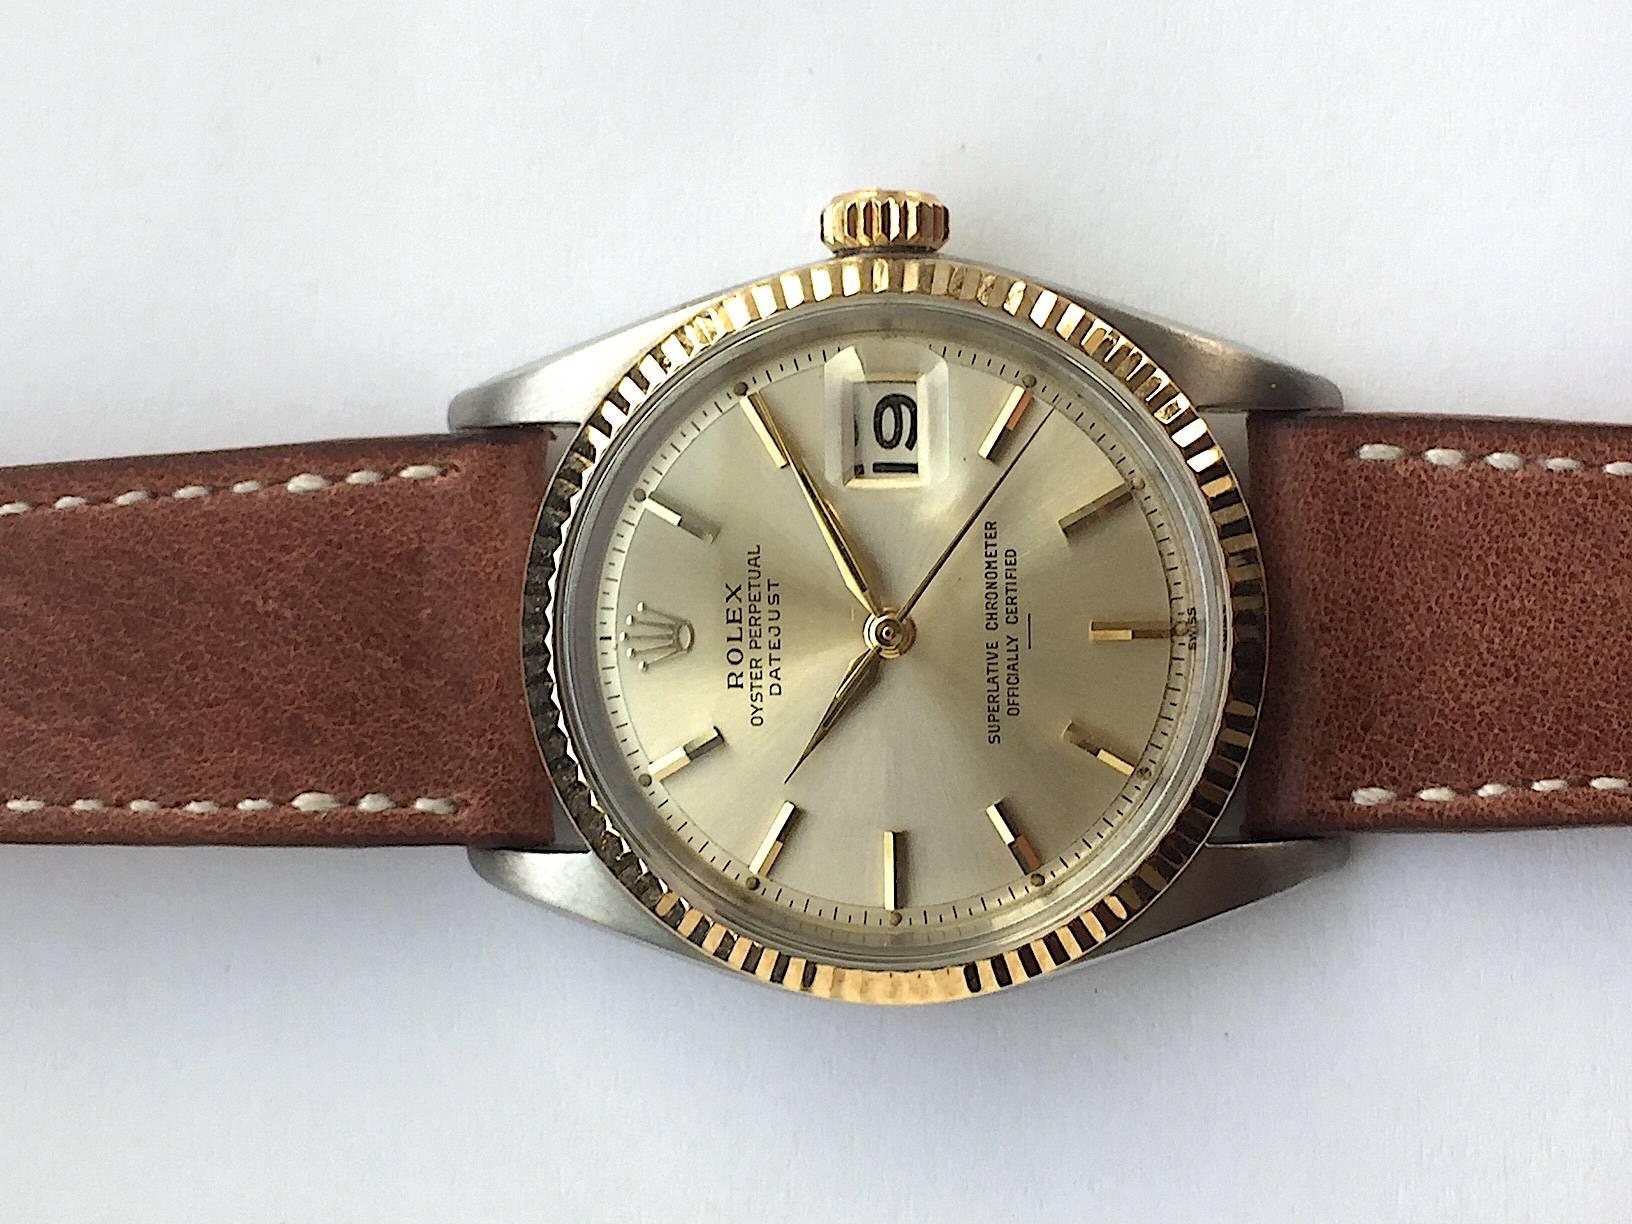 Rolex Stainless Steel and Yellow Gold Oyster Perpetual Datejust Watch
Factory 'Swiss' Only Dial with Underline Marking Corresponding to Early 1960s Production
Yellow Gold Fluted Bezel
36mm in size 
Dauphine Hands
Rolex Calibre Base 1500 Automatic